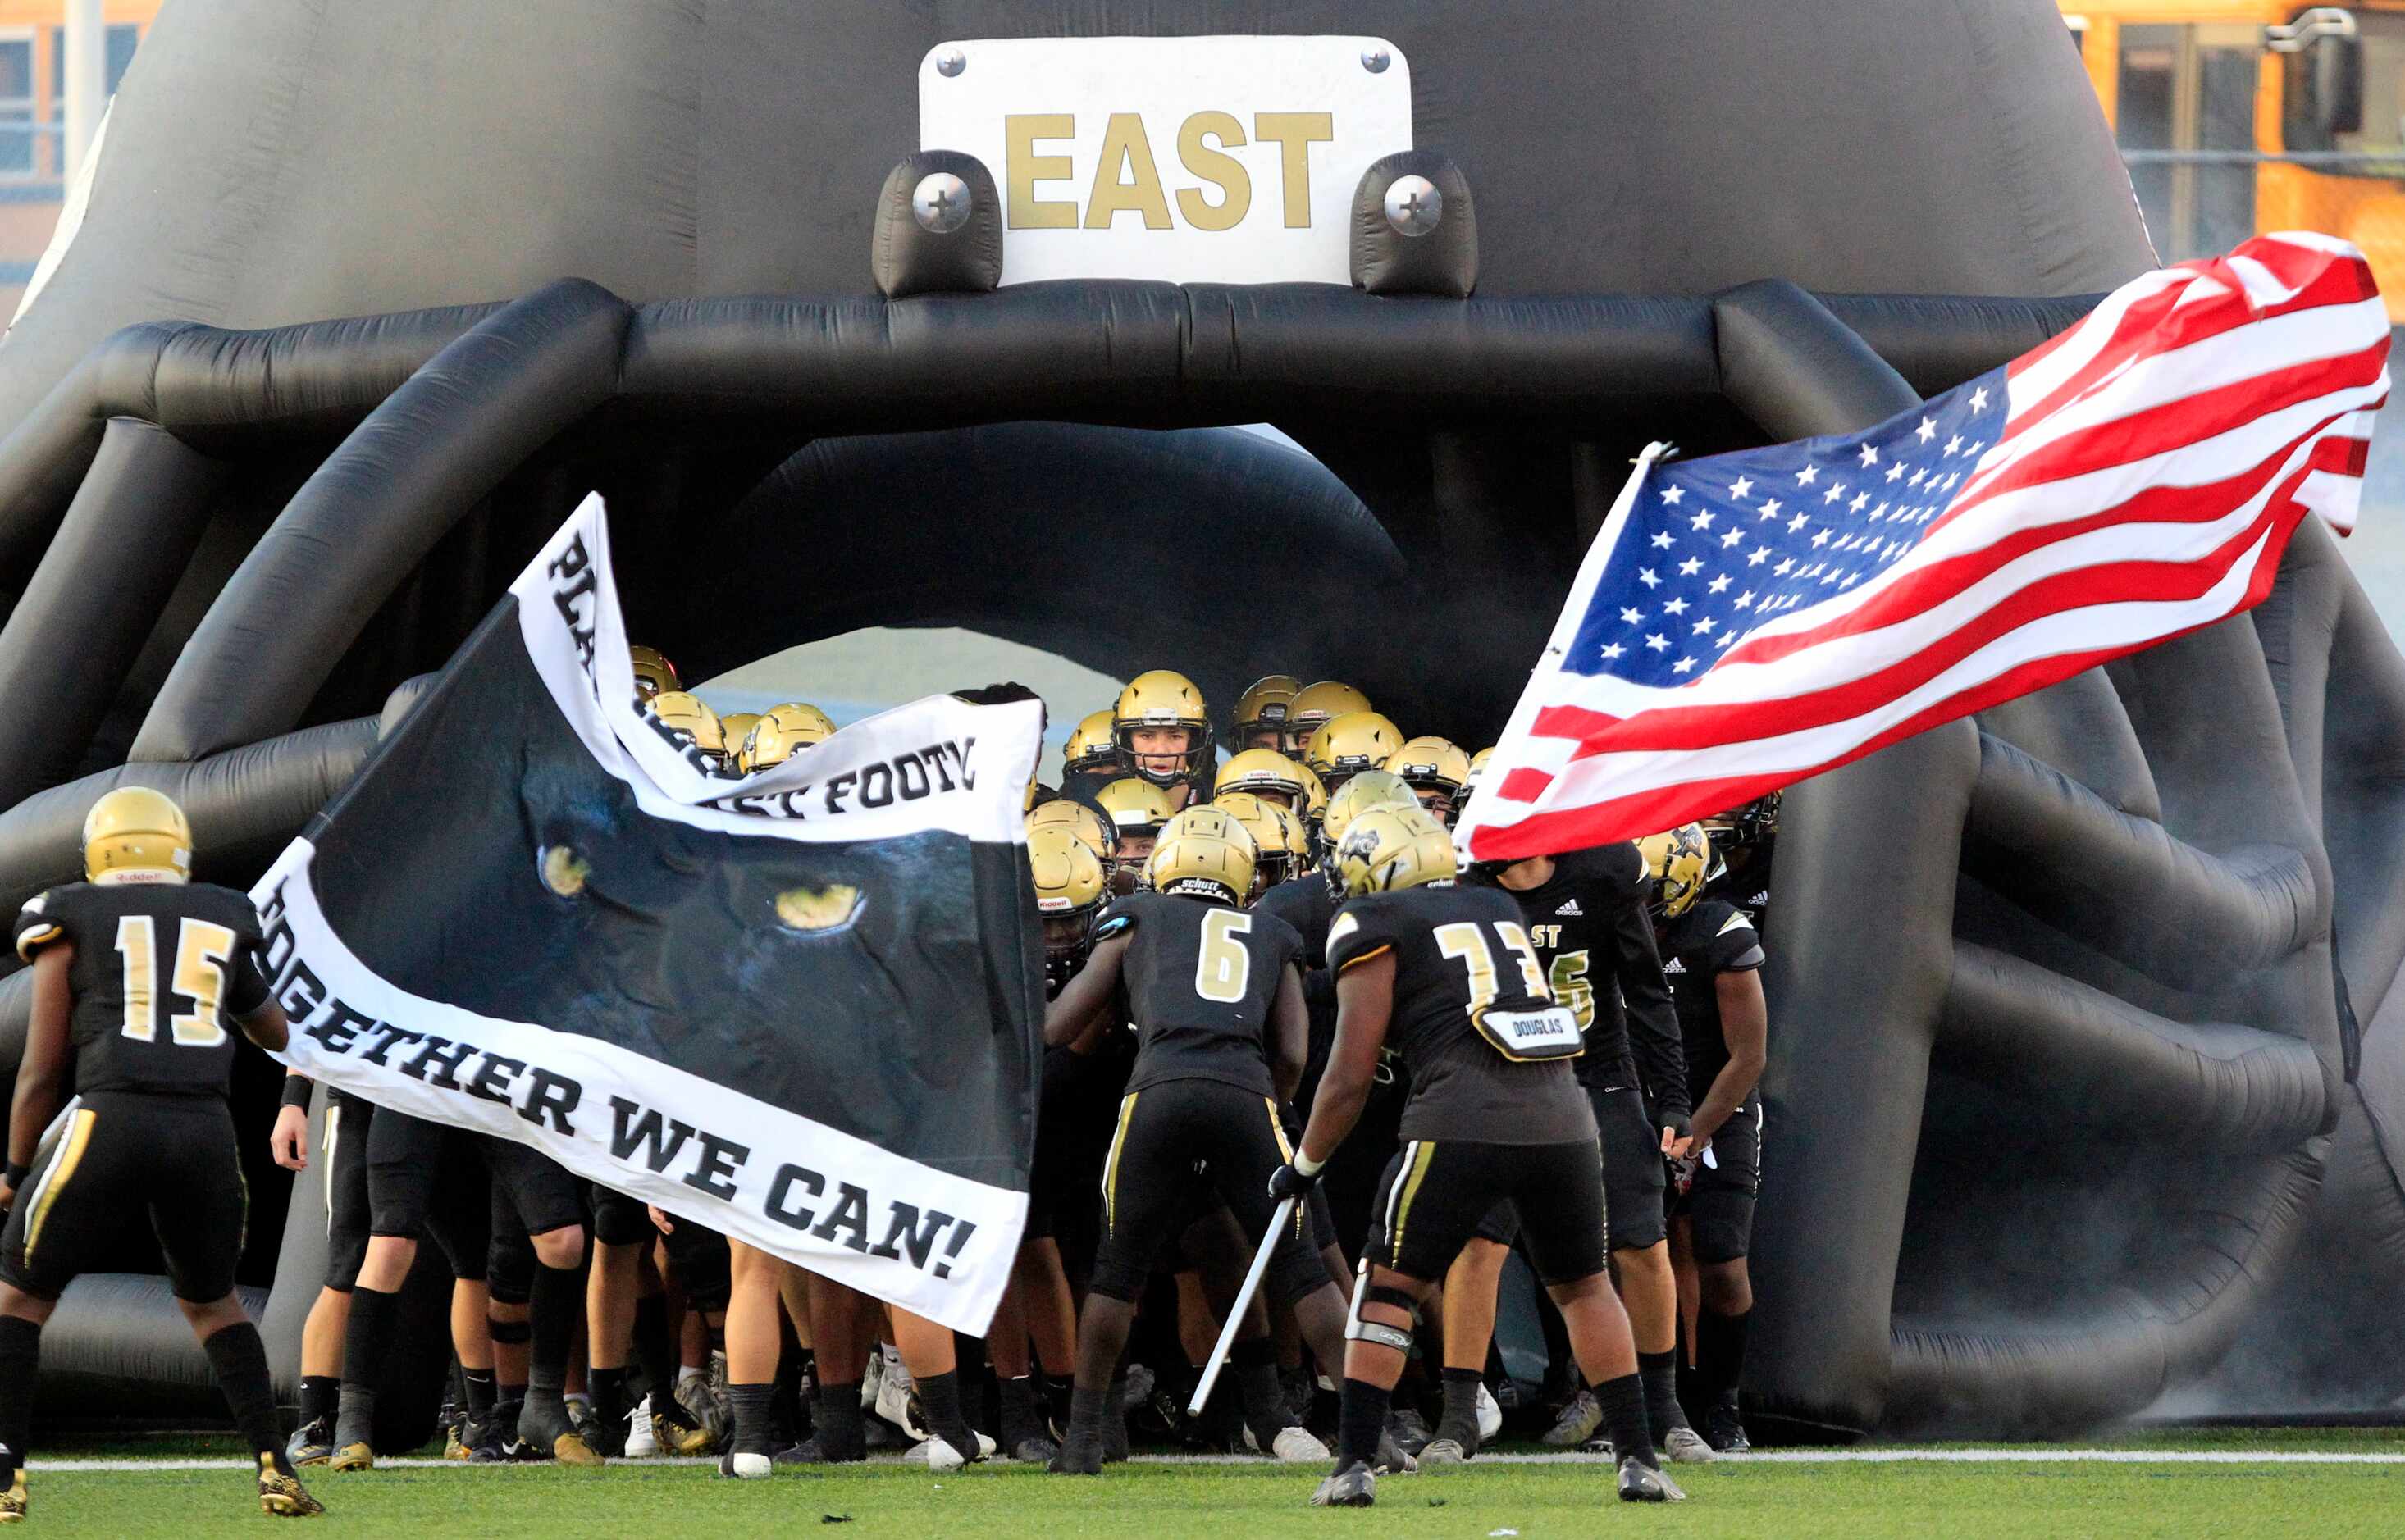 The Plano East team prepares to enter the field before the first half of a high school...